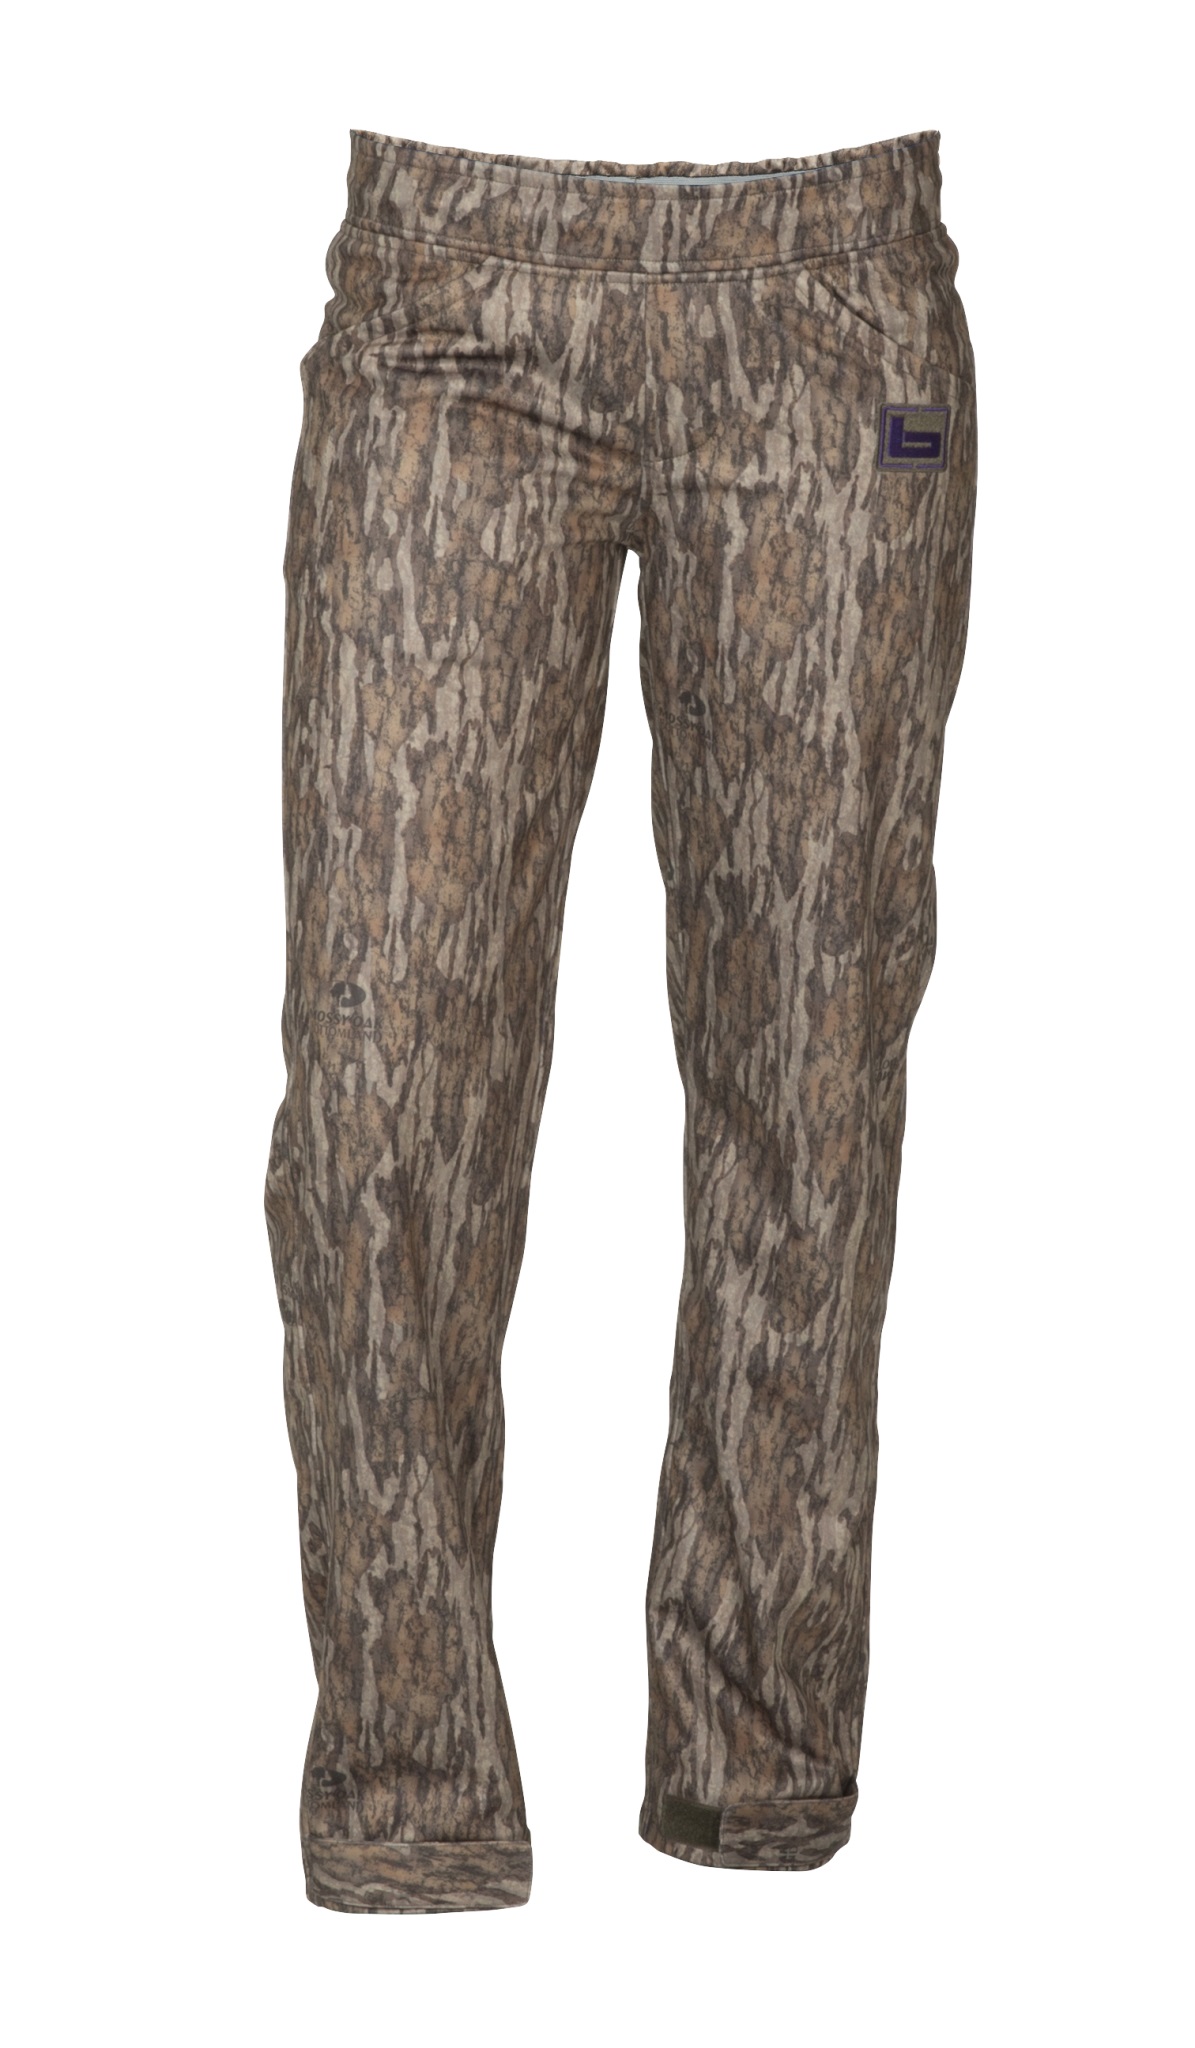 Banded Tec Fleece Wader Pant - Women's  Up to 10% Off w/ Free Shipping and  Handling